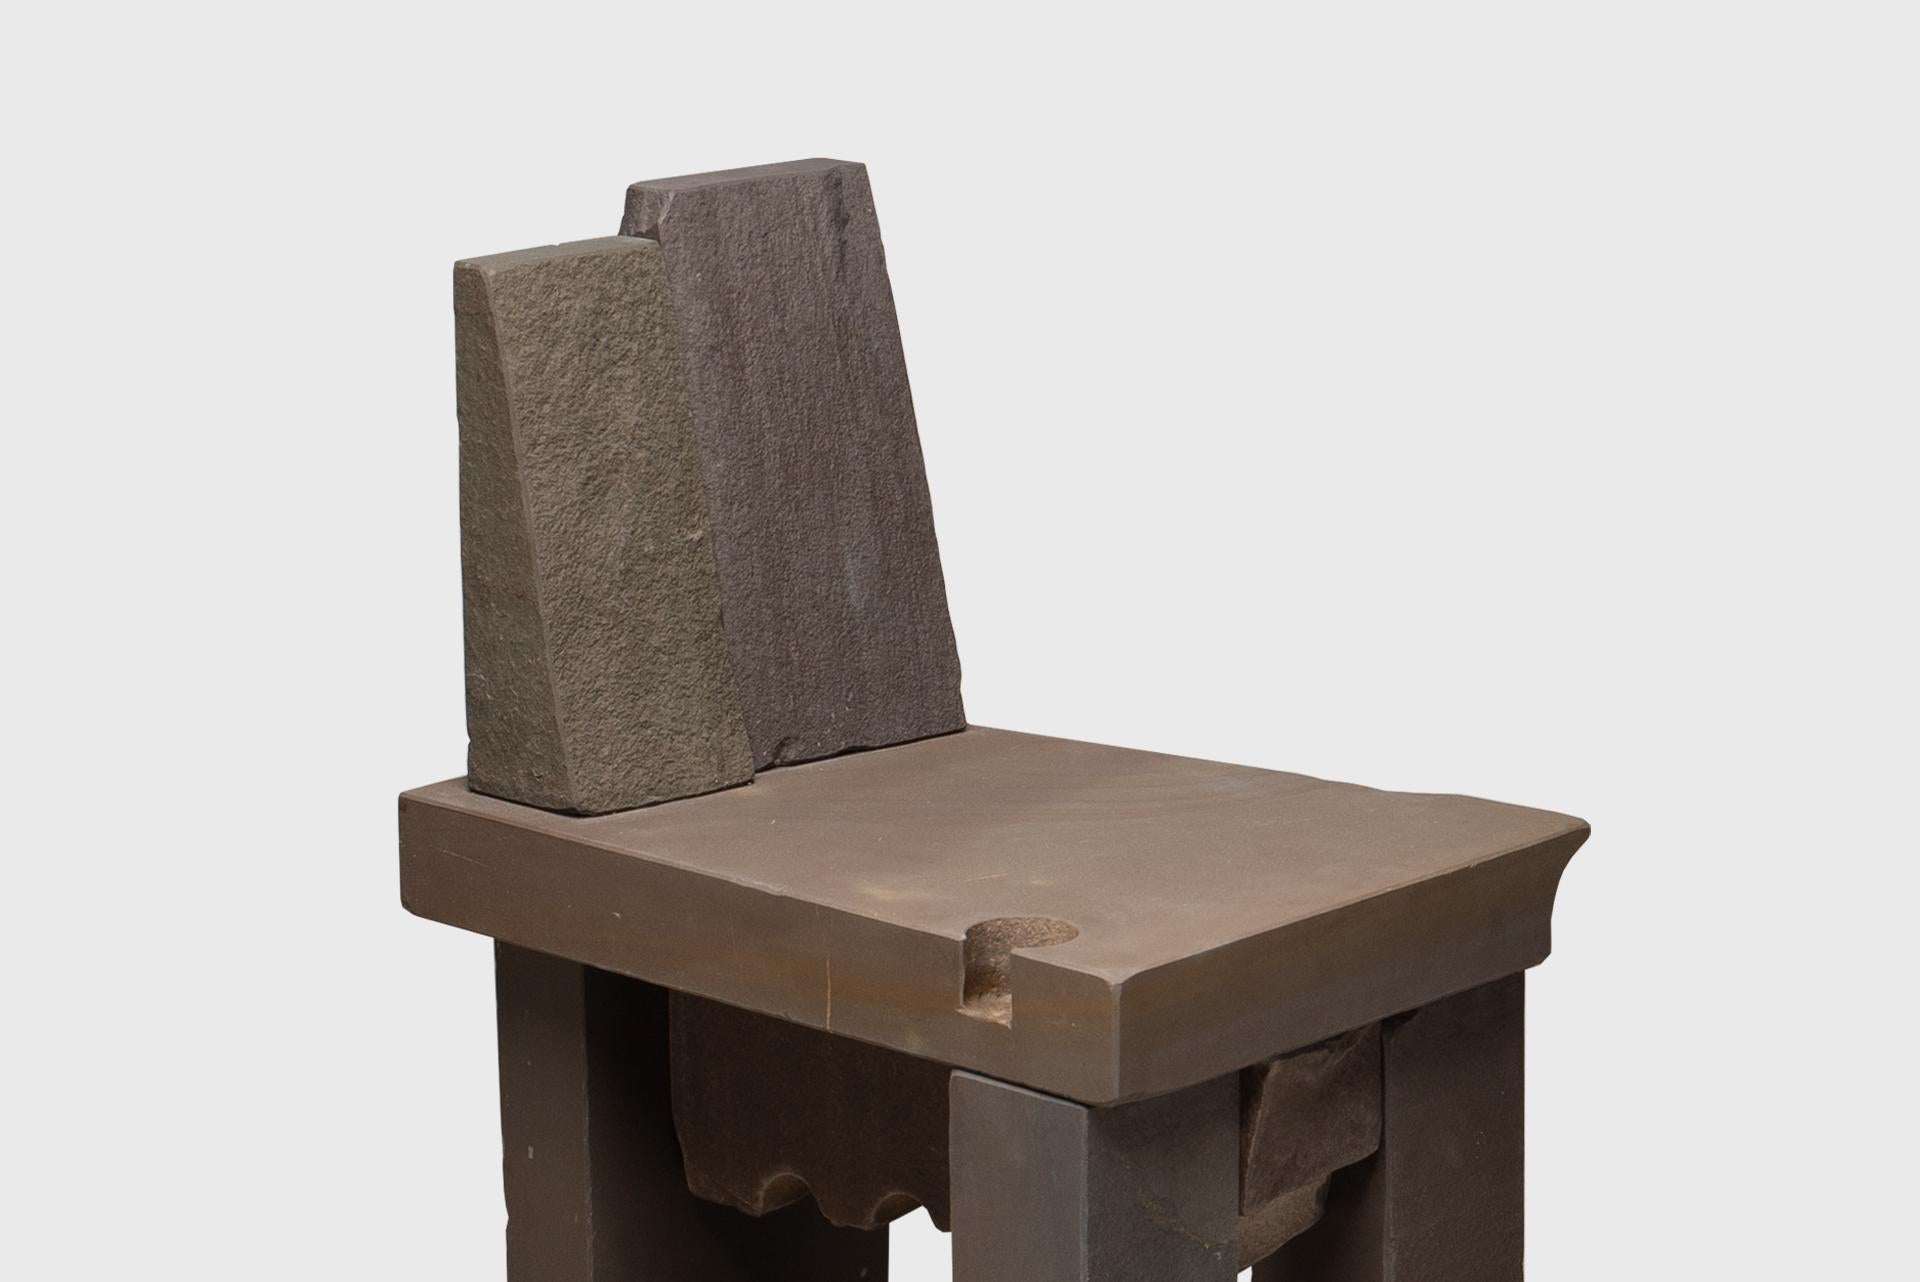 Contemporary Natural Chair 10, Graywacke Offcut Gray Stone, Carsten in der Elst For Sale 3